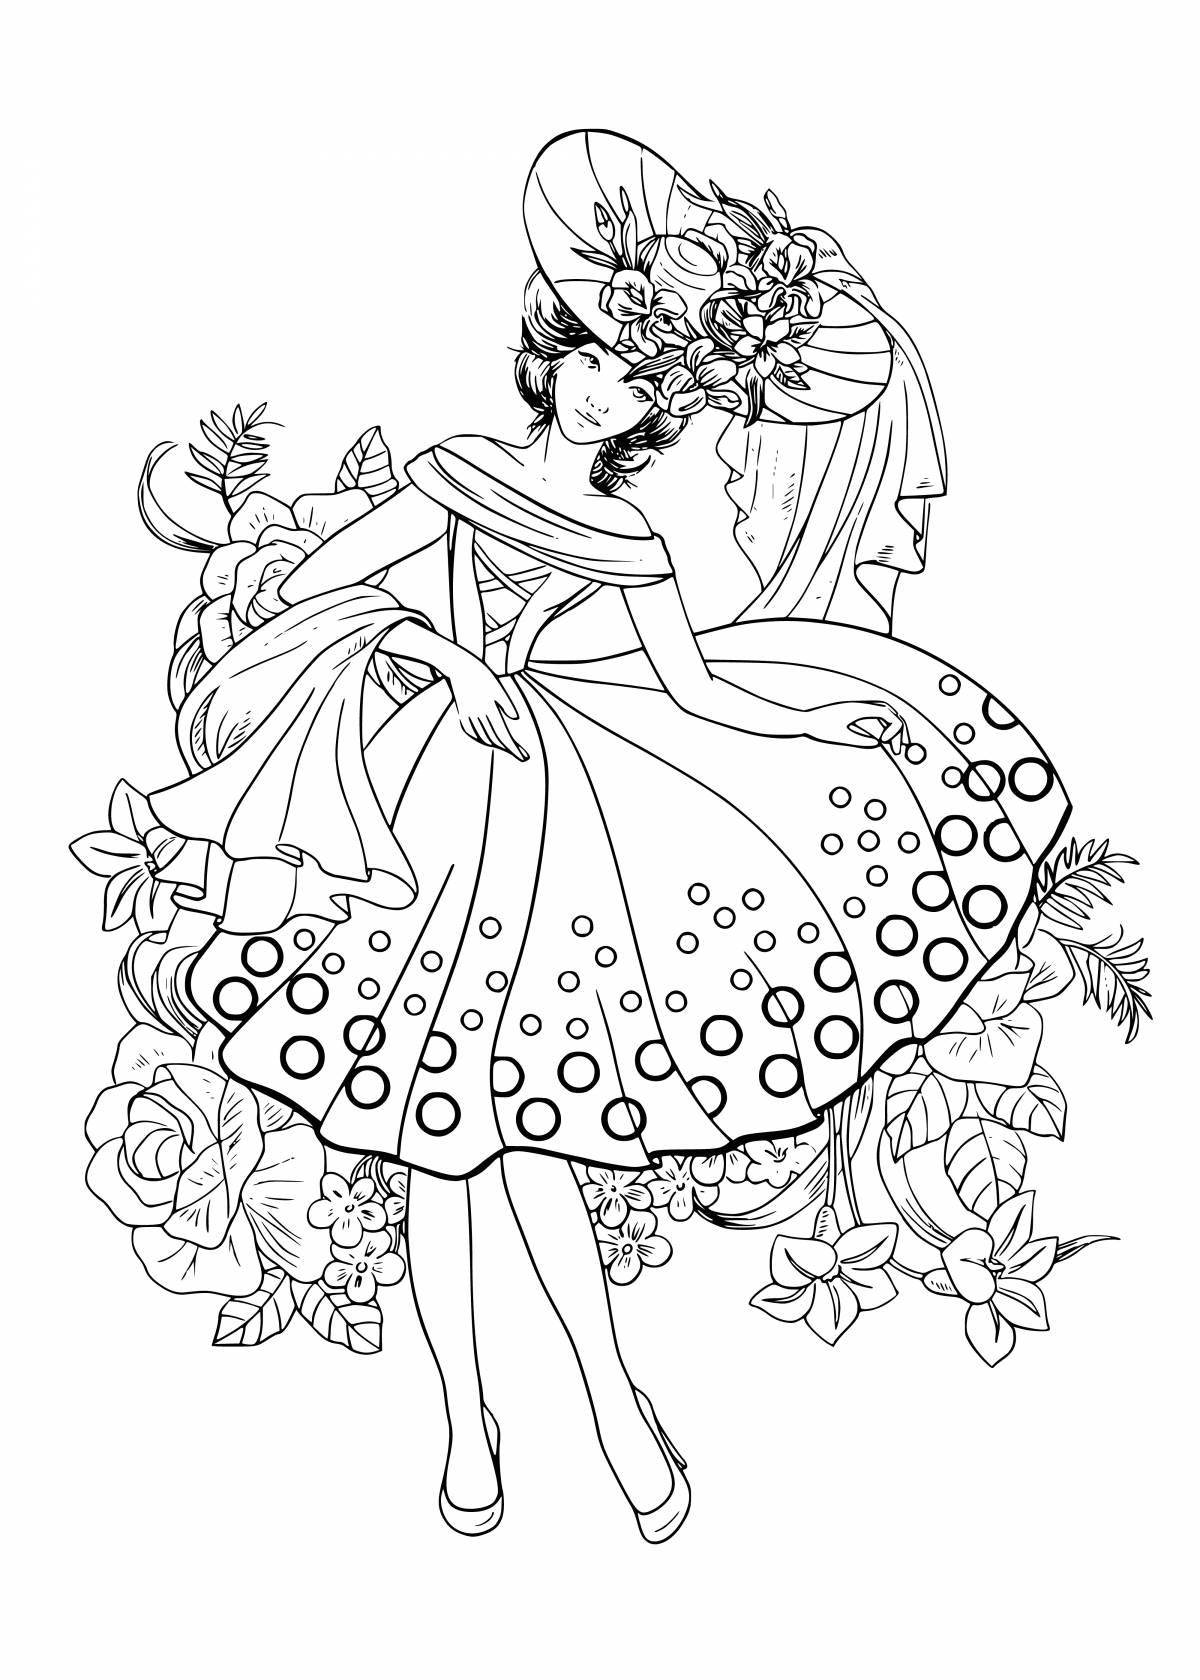 Amazing coloring book of a girl in a dress